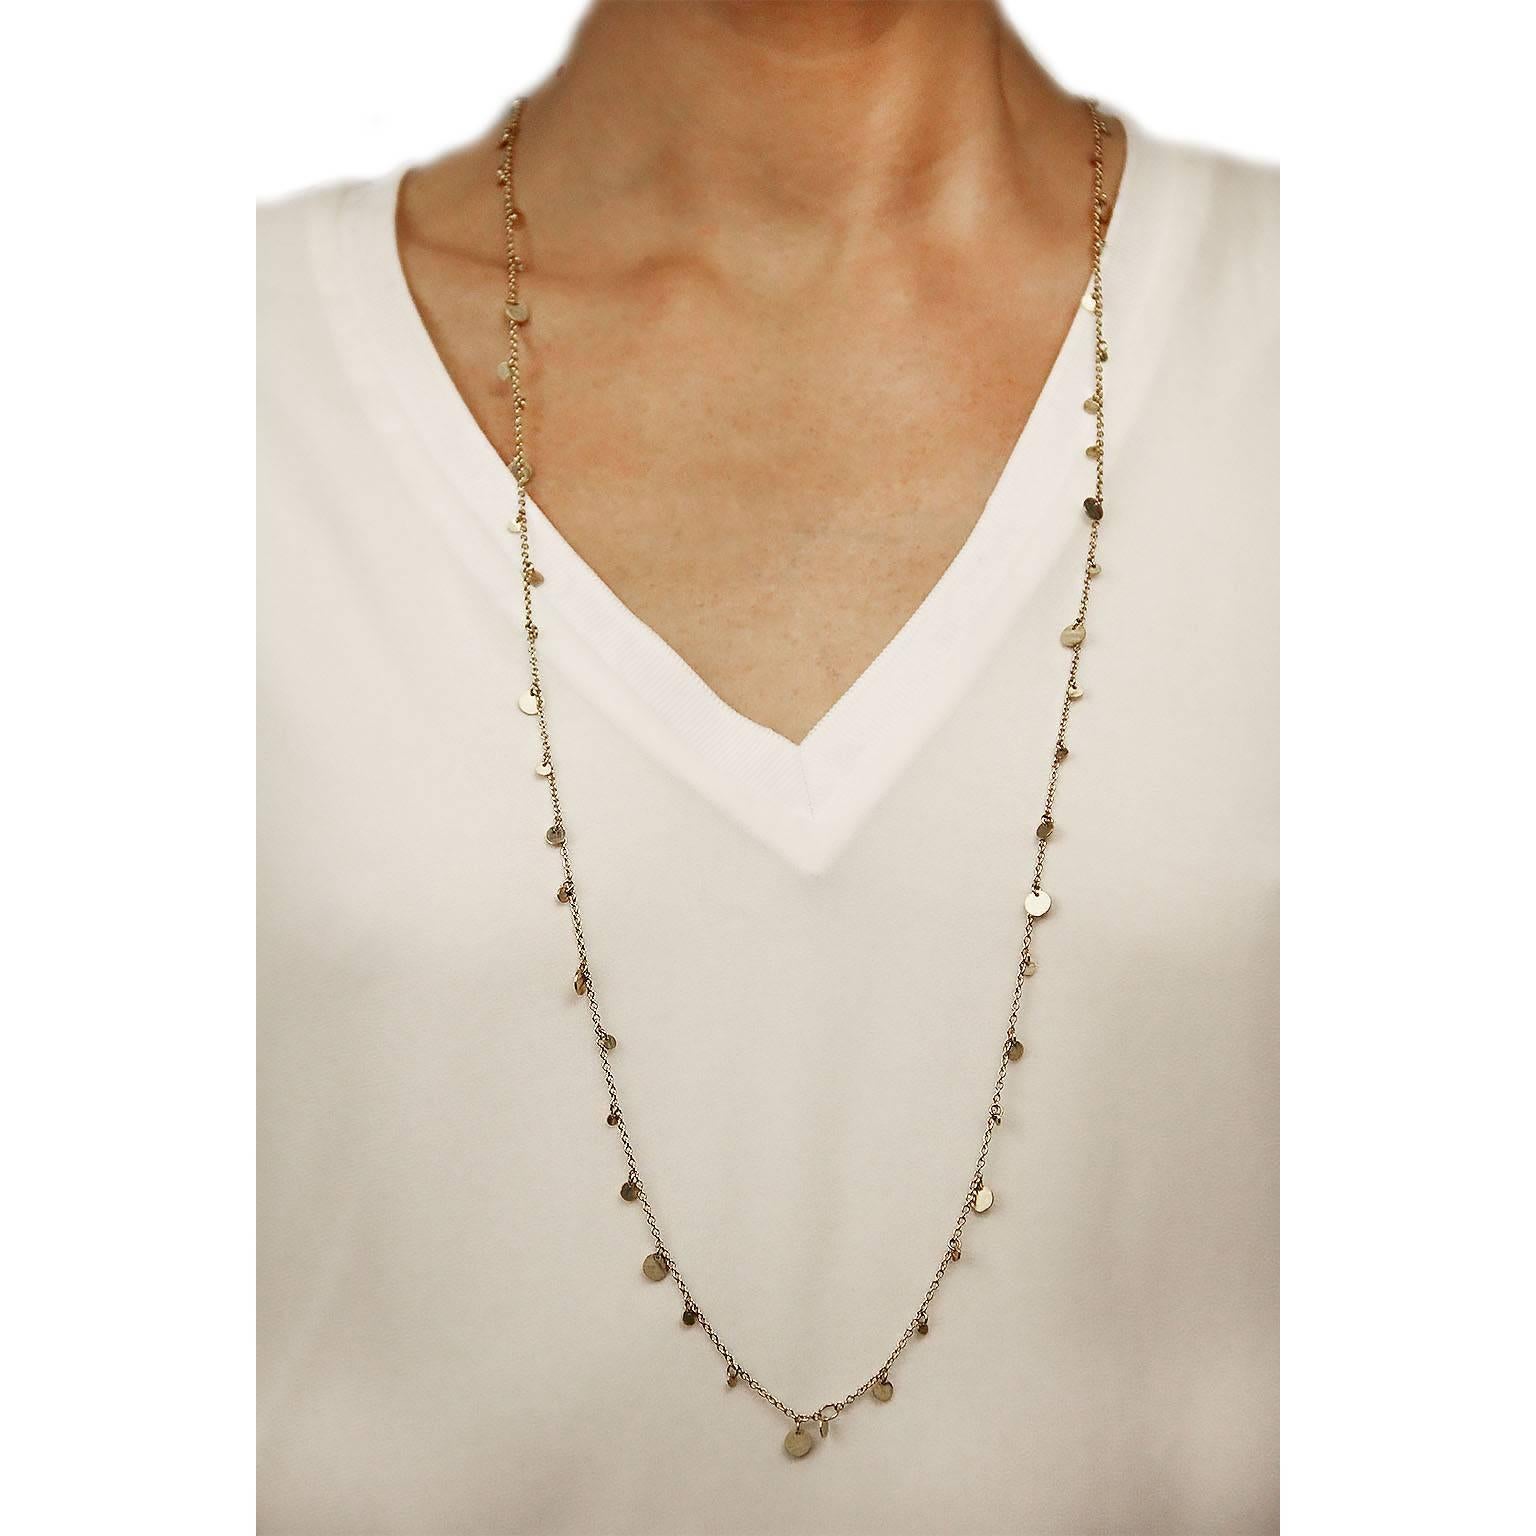 Jona design collection, hand crafted in Italy, 18 karat rose gold long chain sautoir necklace.  A multitude of gold coins in various sizes dangle from the 35.4in-90cm long, chain.  It can also be wrapped around your neck twice for an instant,